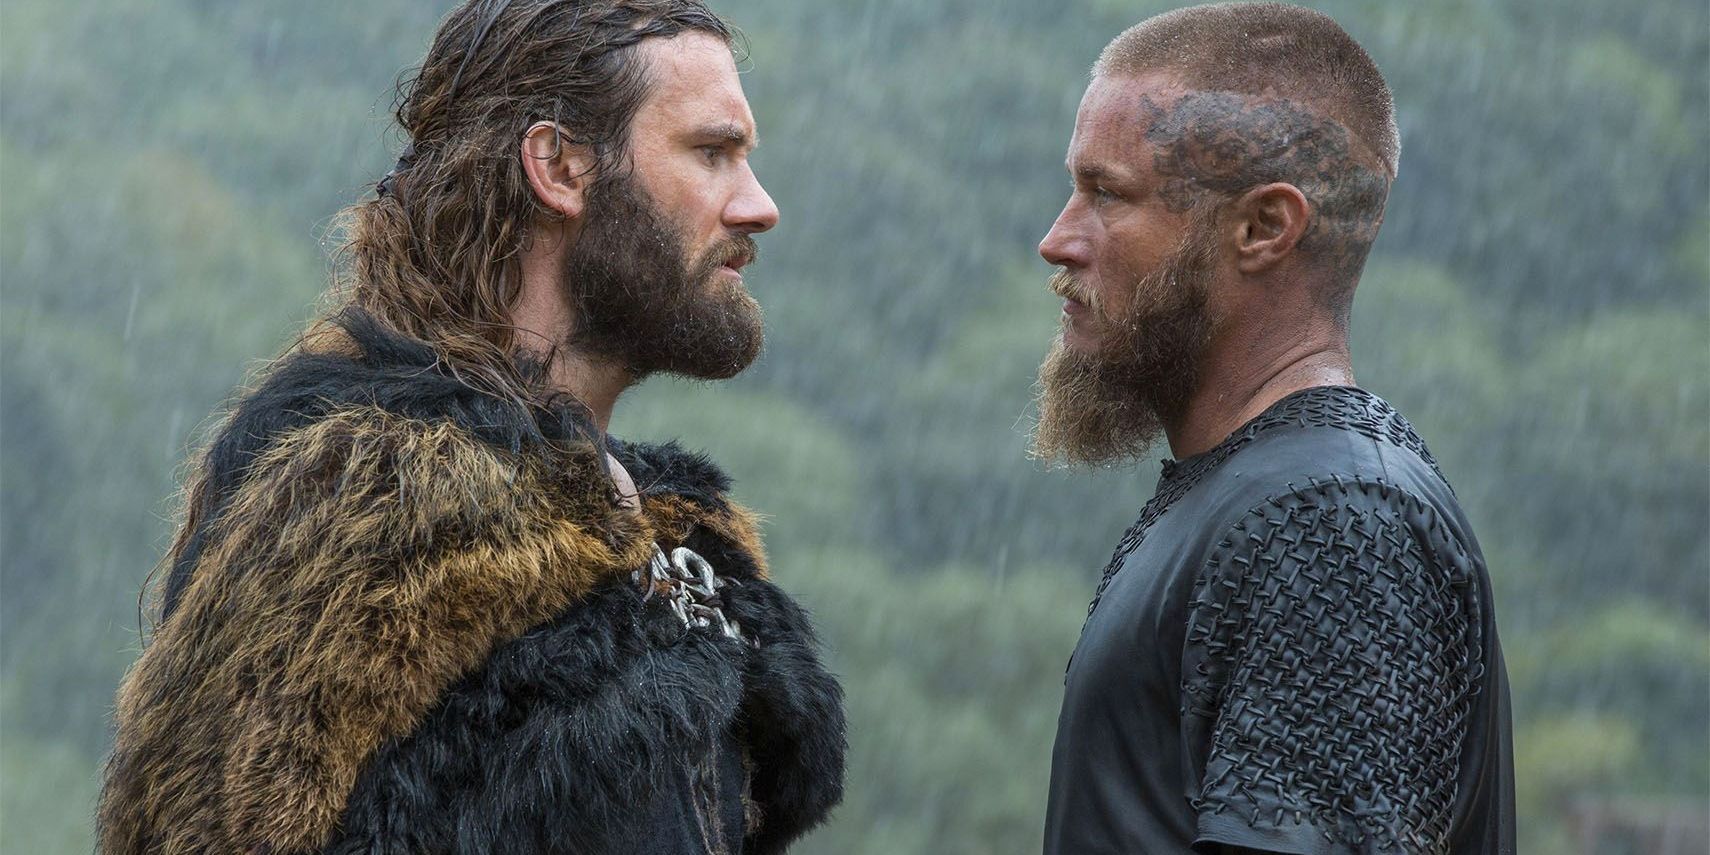 Ragnar and Rollo confront each other over Rollo's betrayal. Ragnar left Rollo behind on his trip to England